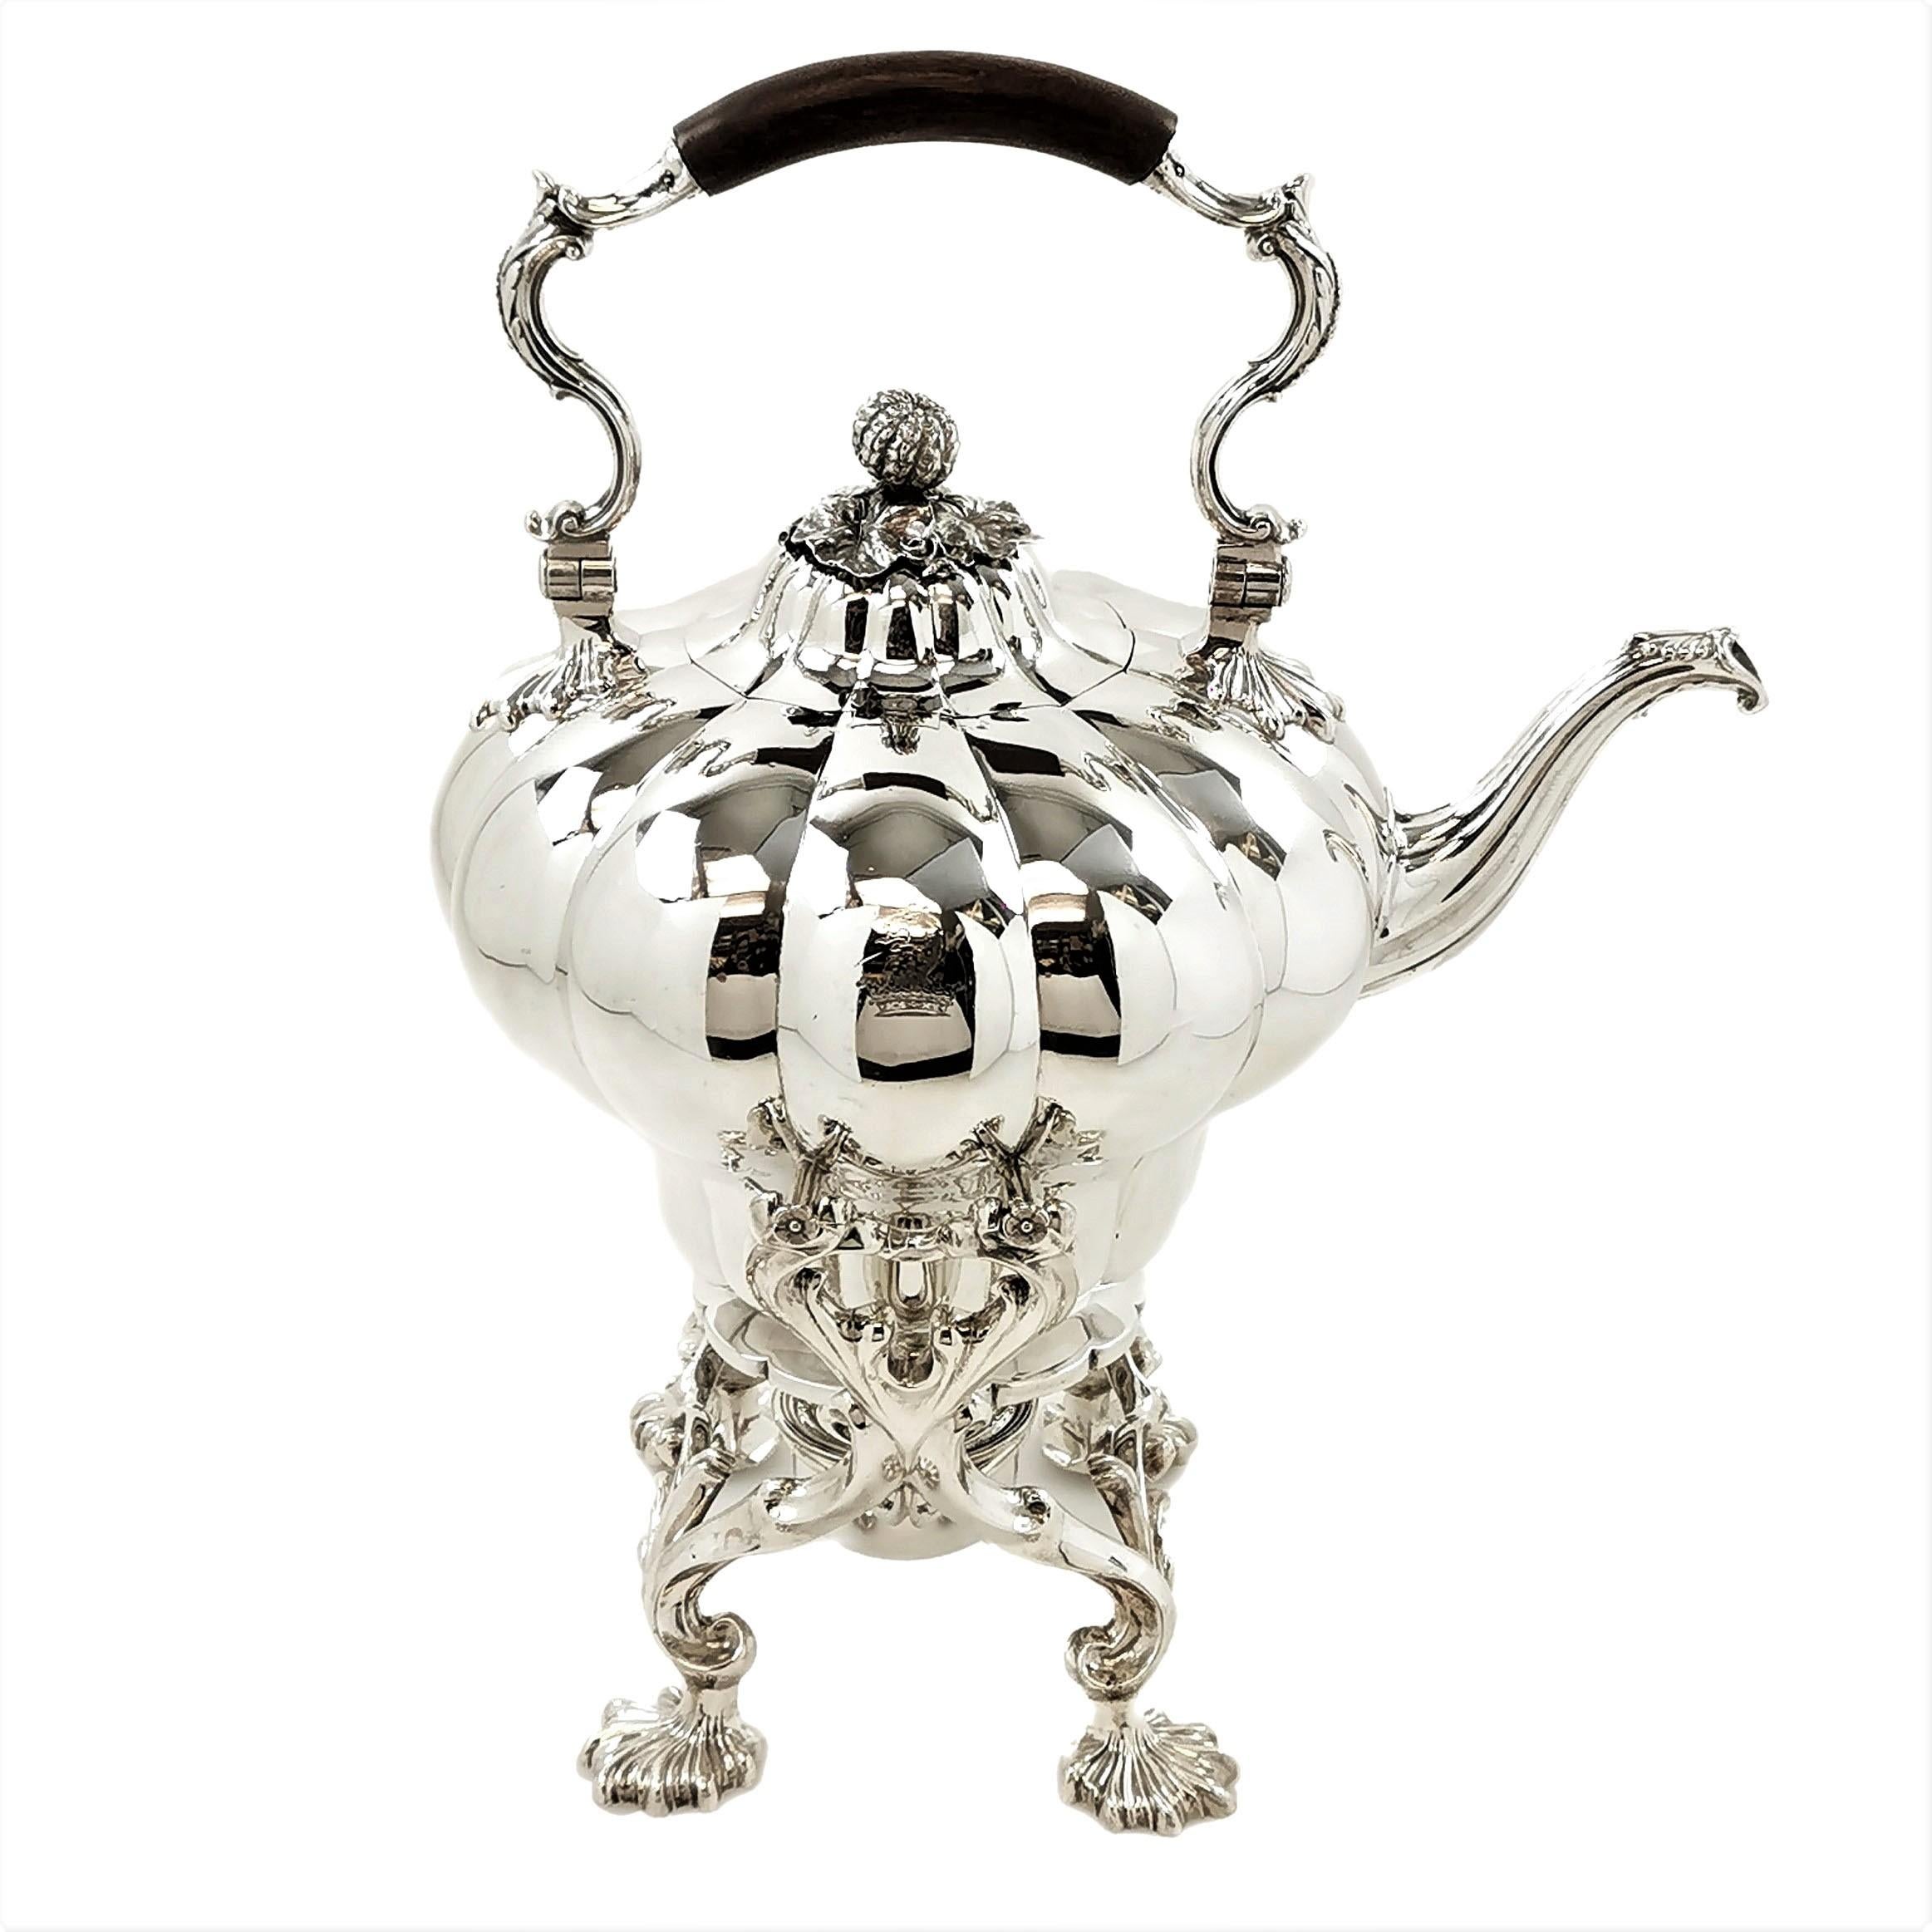 An impressive antique William IV solid Silver Kettle on Stand in an elegant classic Melon pattern. The stand rests on 4 shell feet and has a removable burner resting in the centre. The Kettle has a small crest engraved on the size. This Kettle on